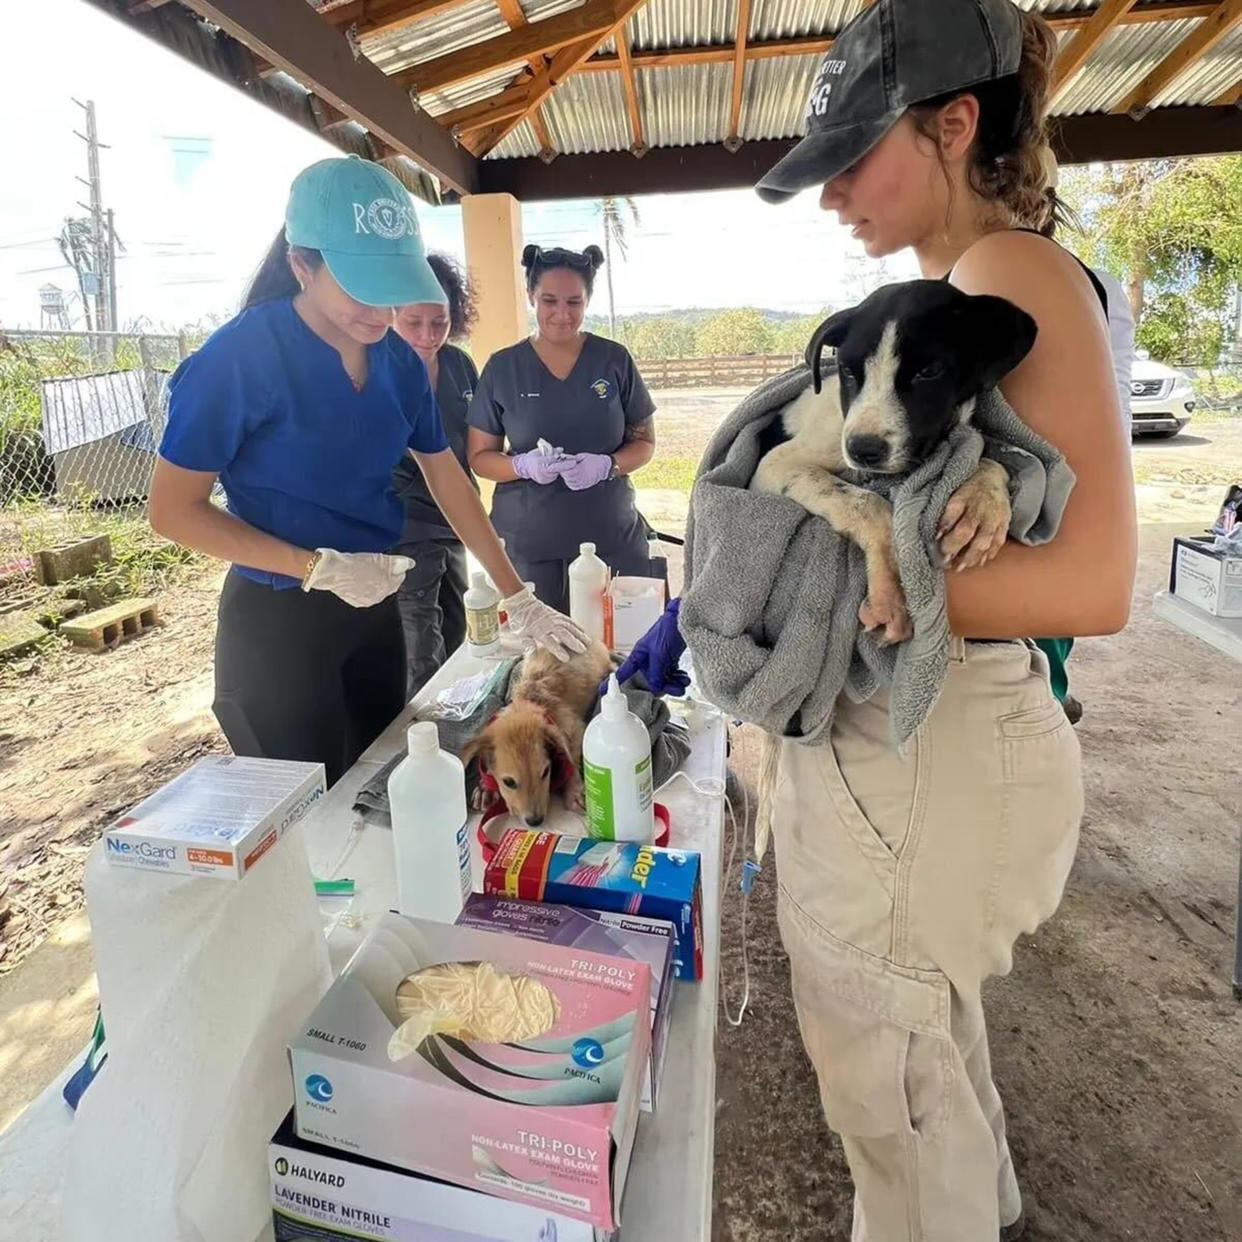 A group of volunteer veterinarians and students tend to the animals. (Danielle Campoamor / TODAY)